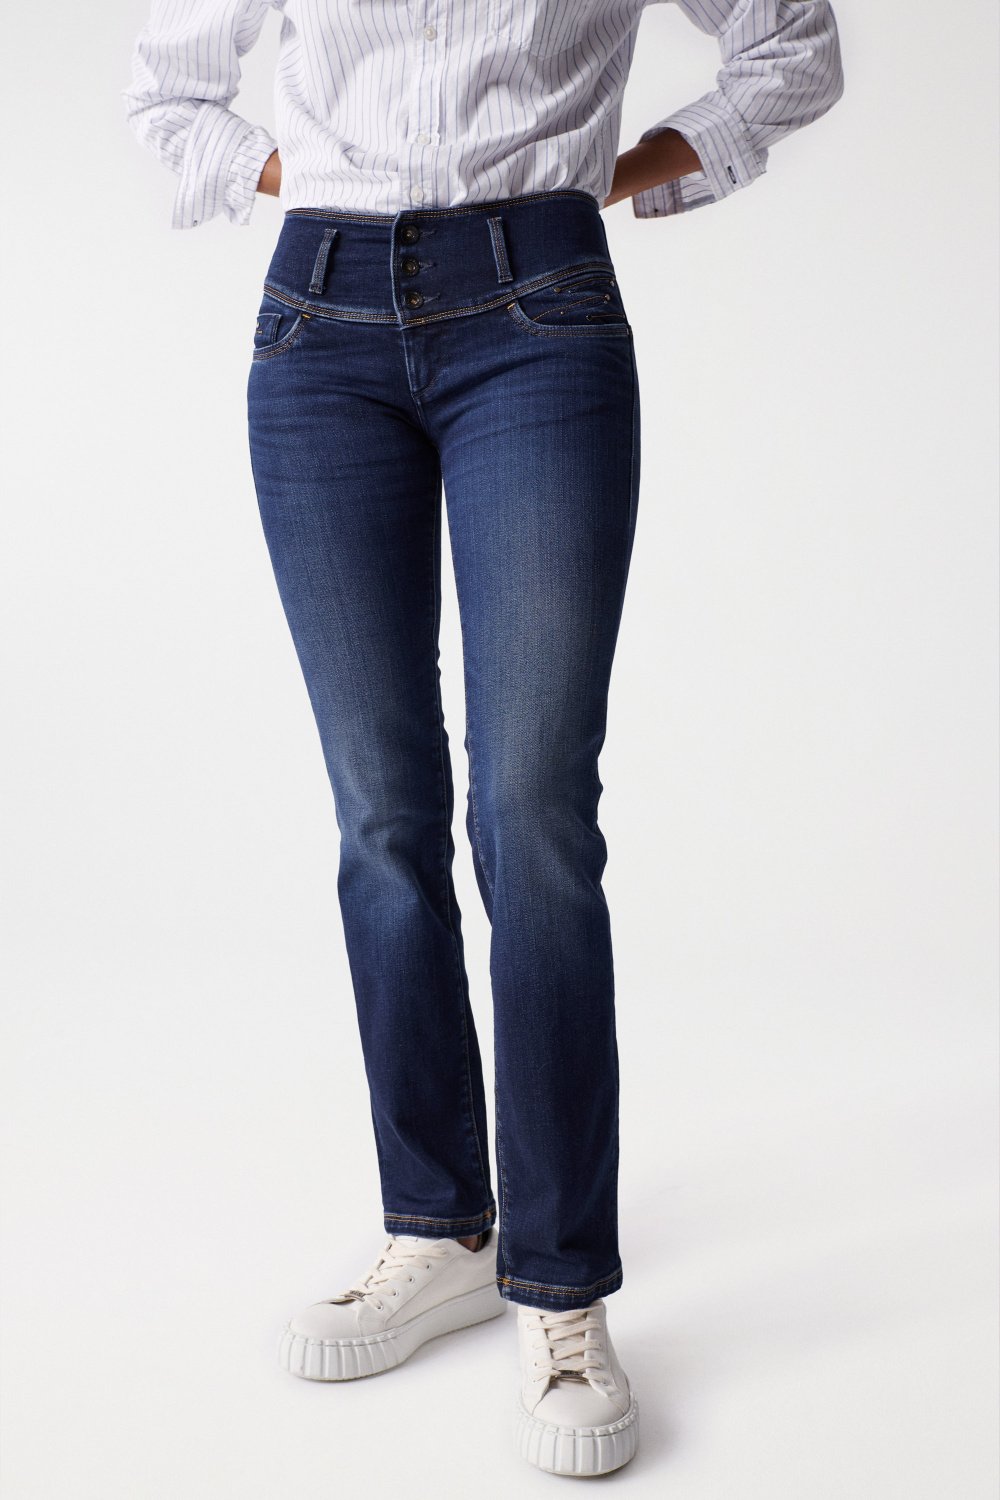 SLIM PUSH UP MYSTERY JEANS WITH DETAILS ON THE POCKETS - Salsa